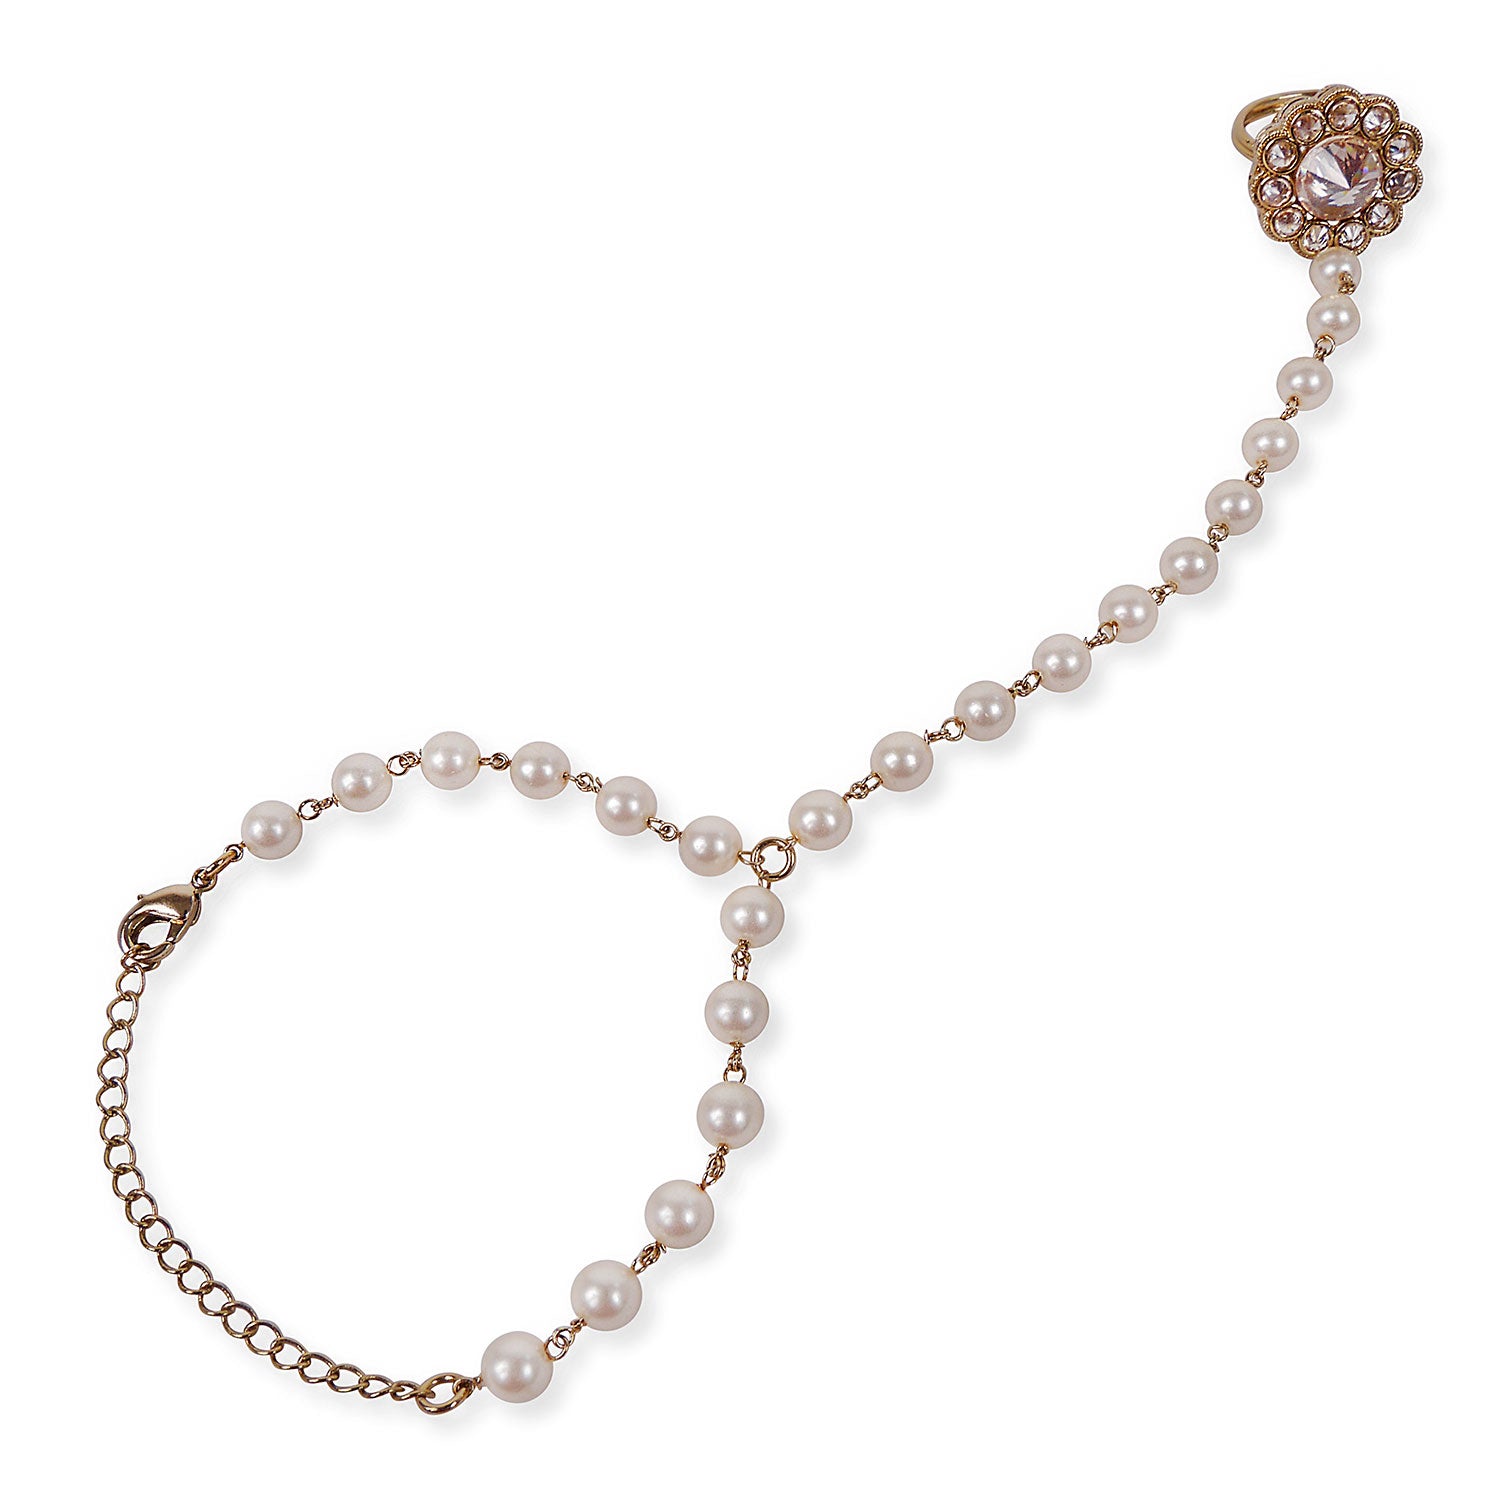 Vintage Pearl Hand Chain in Antique Gold